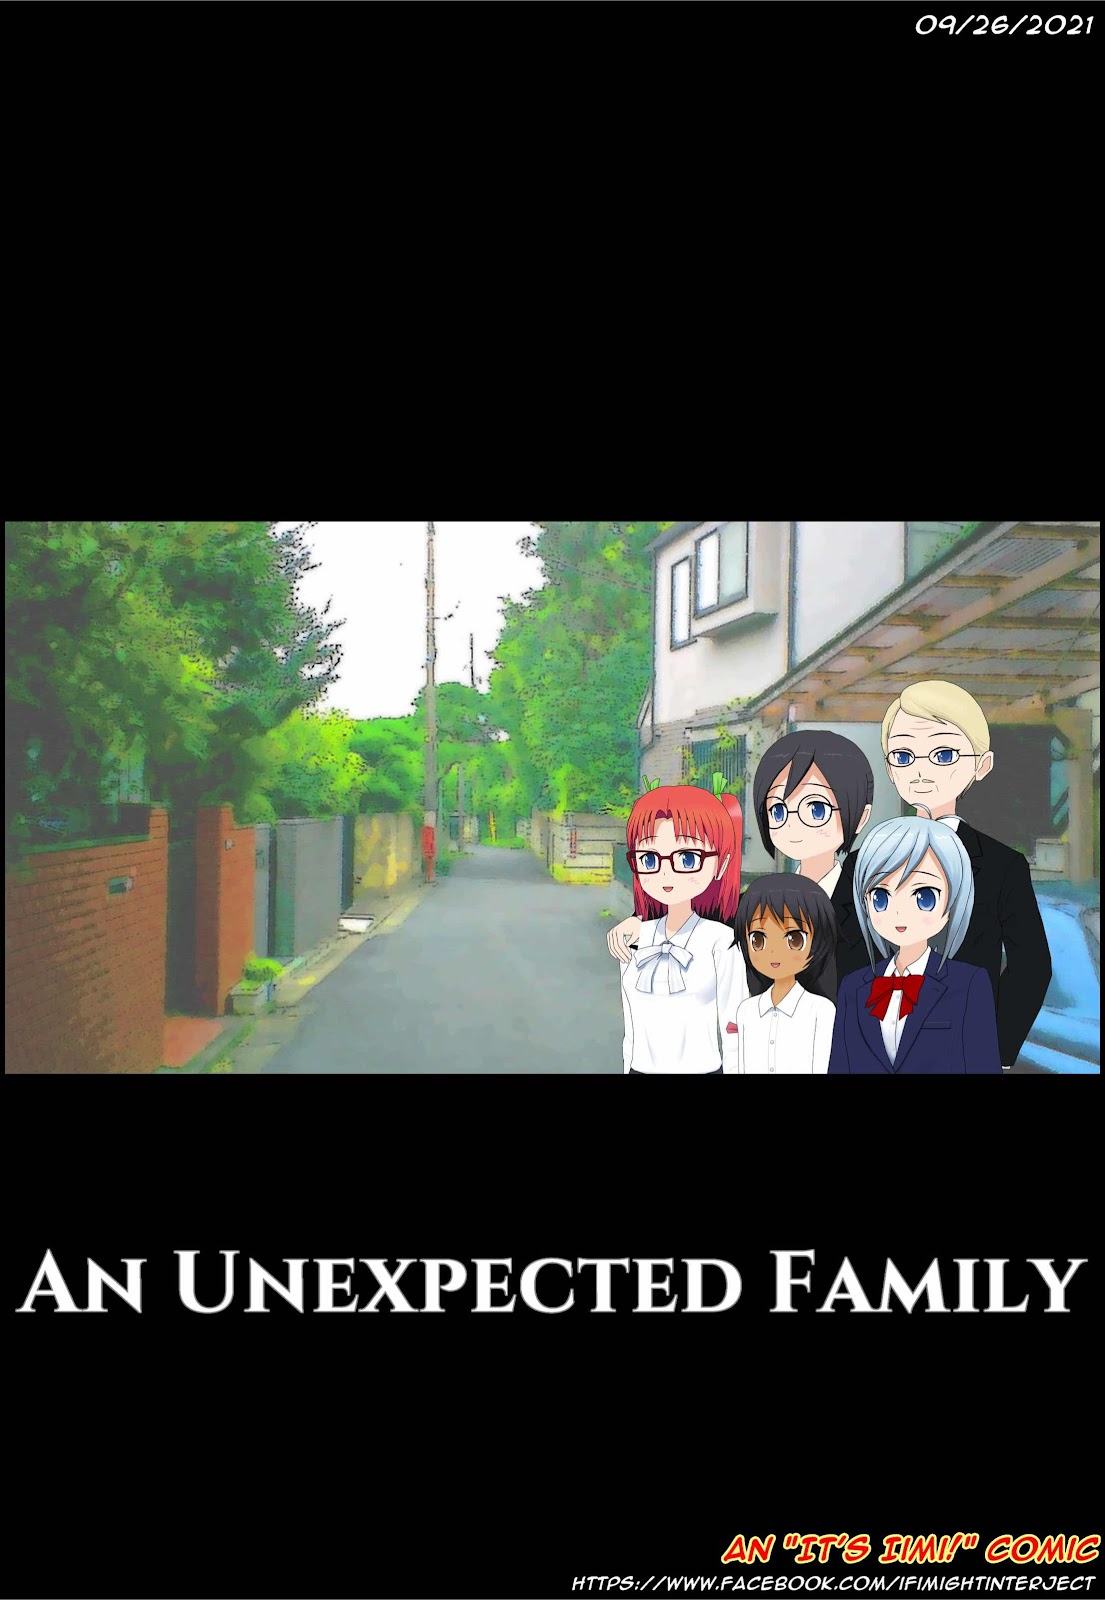 It’s Iimi! Becoming An Unexpected Family